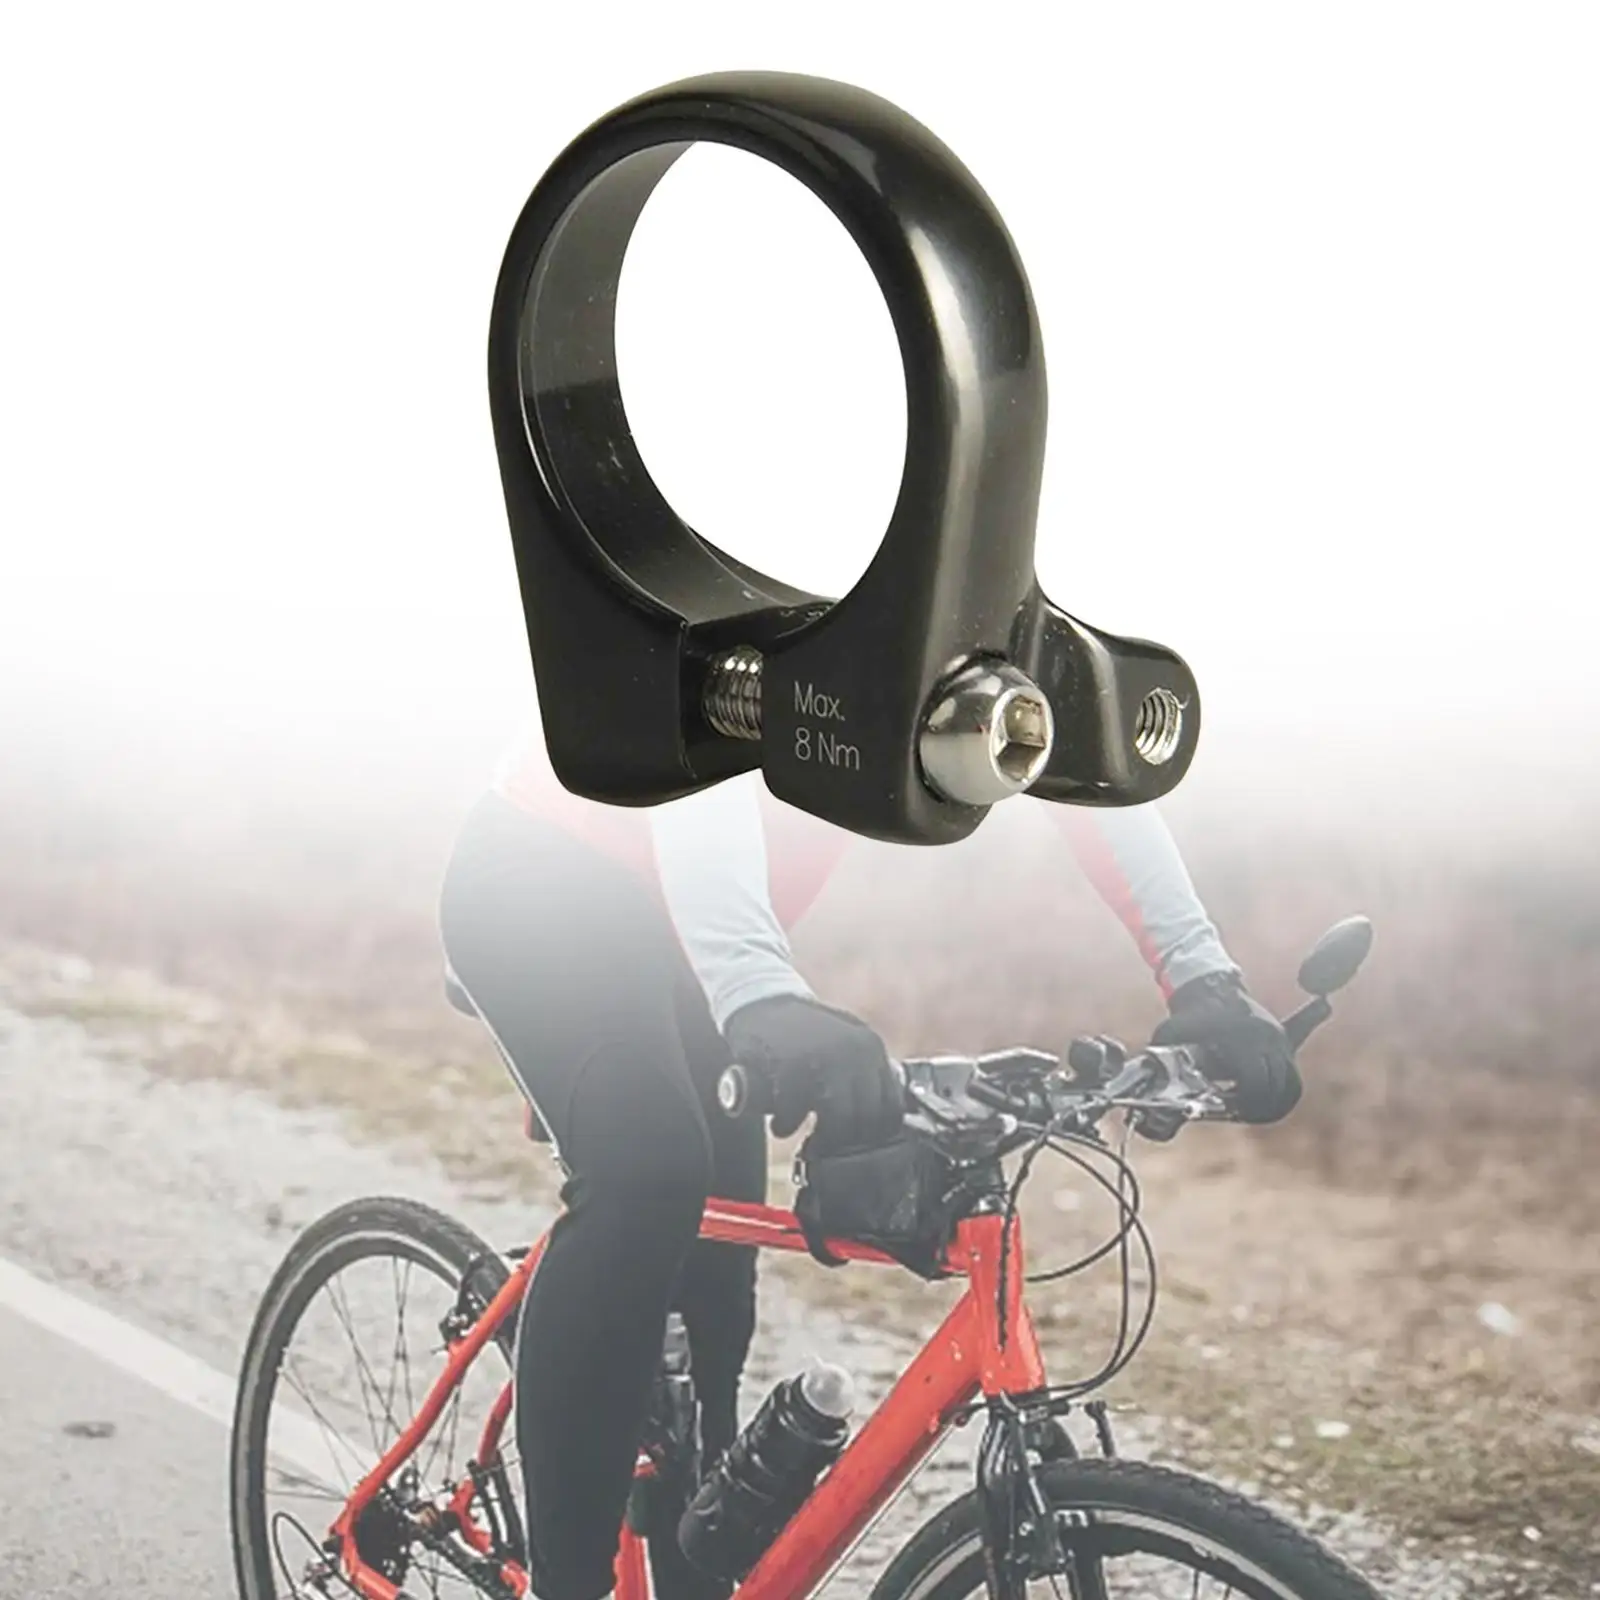 Bike Rear Rack Mount Adapter Lightweight Bicycle Accessories for 30.8/30.9mm